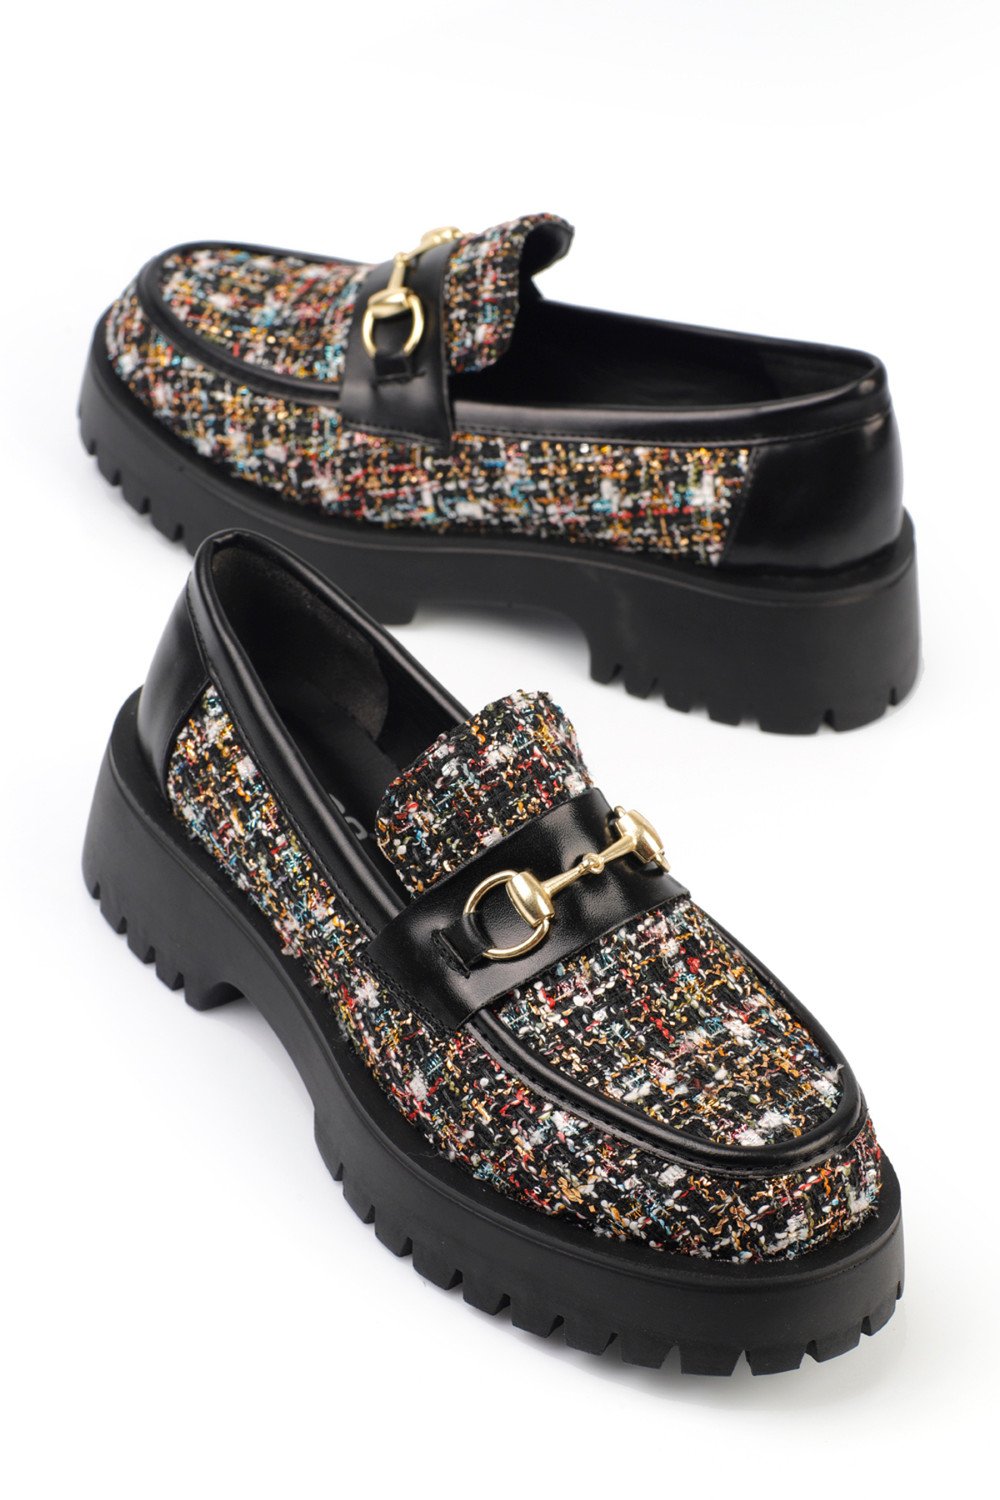 Capone Outfitters Buckle Trak Sole Women's Loafer